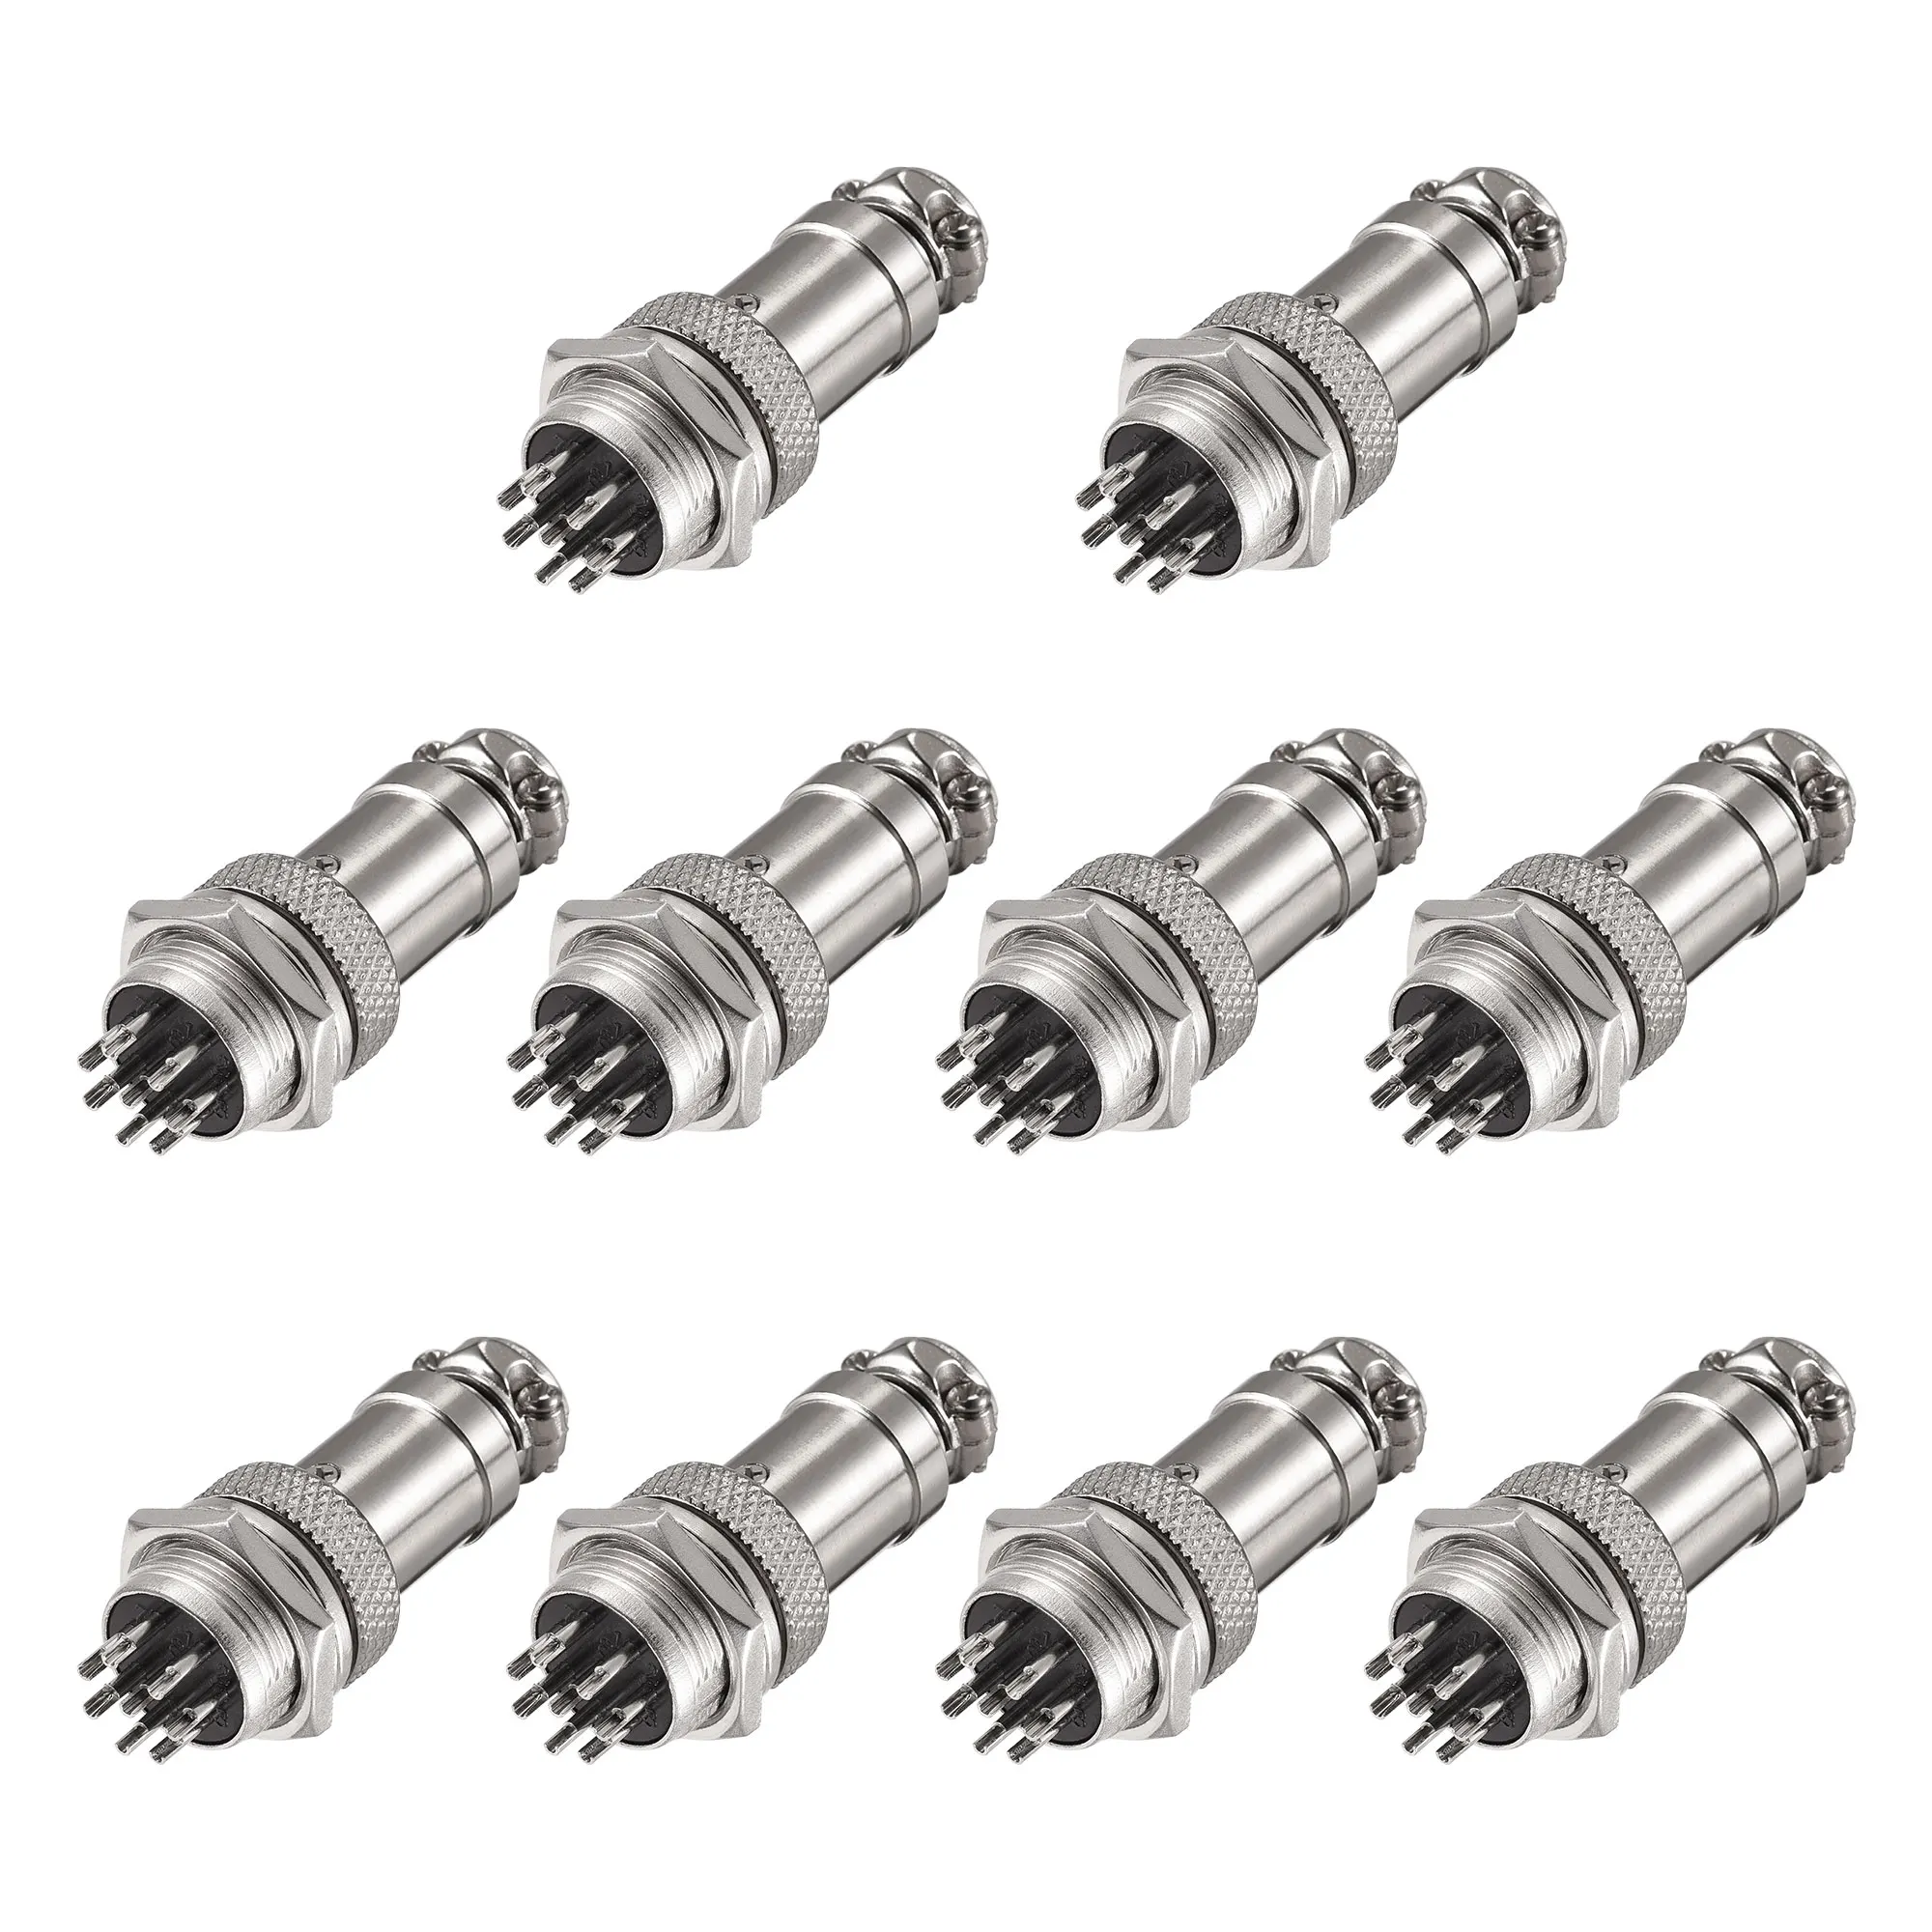 

10Set GX16 Male and Female Aviation Connector Wire Panel Metal Connector 16mm 8 Pin 5A 250V Plug Socket Connector Fittings